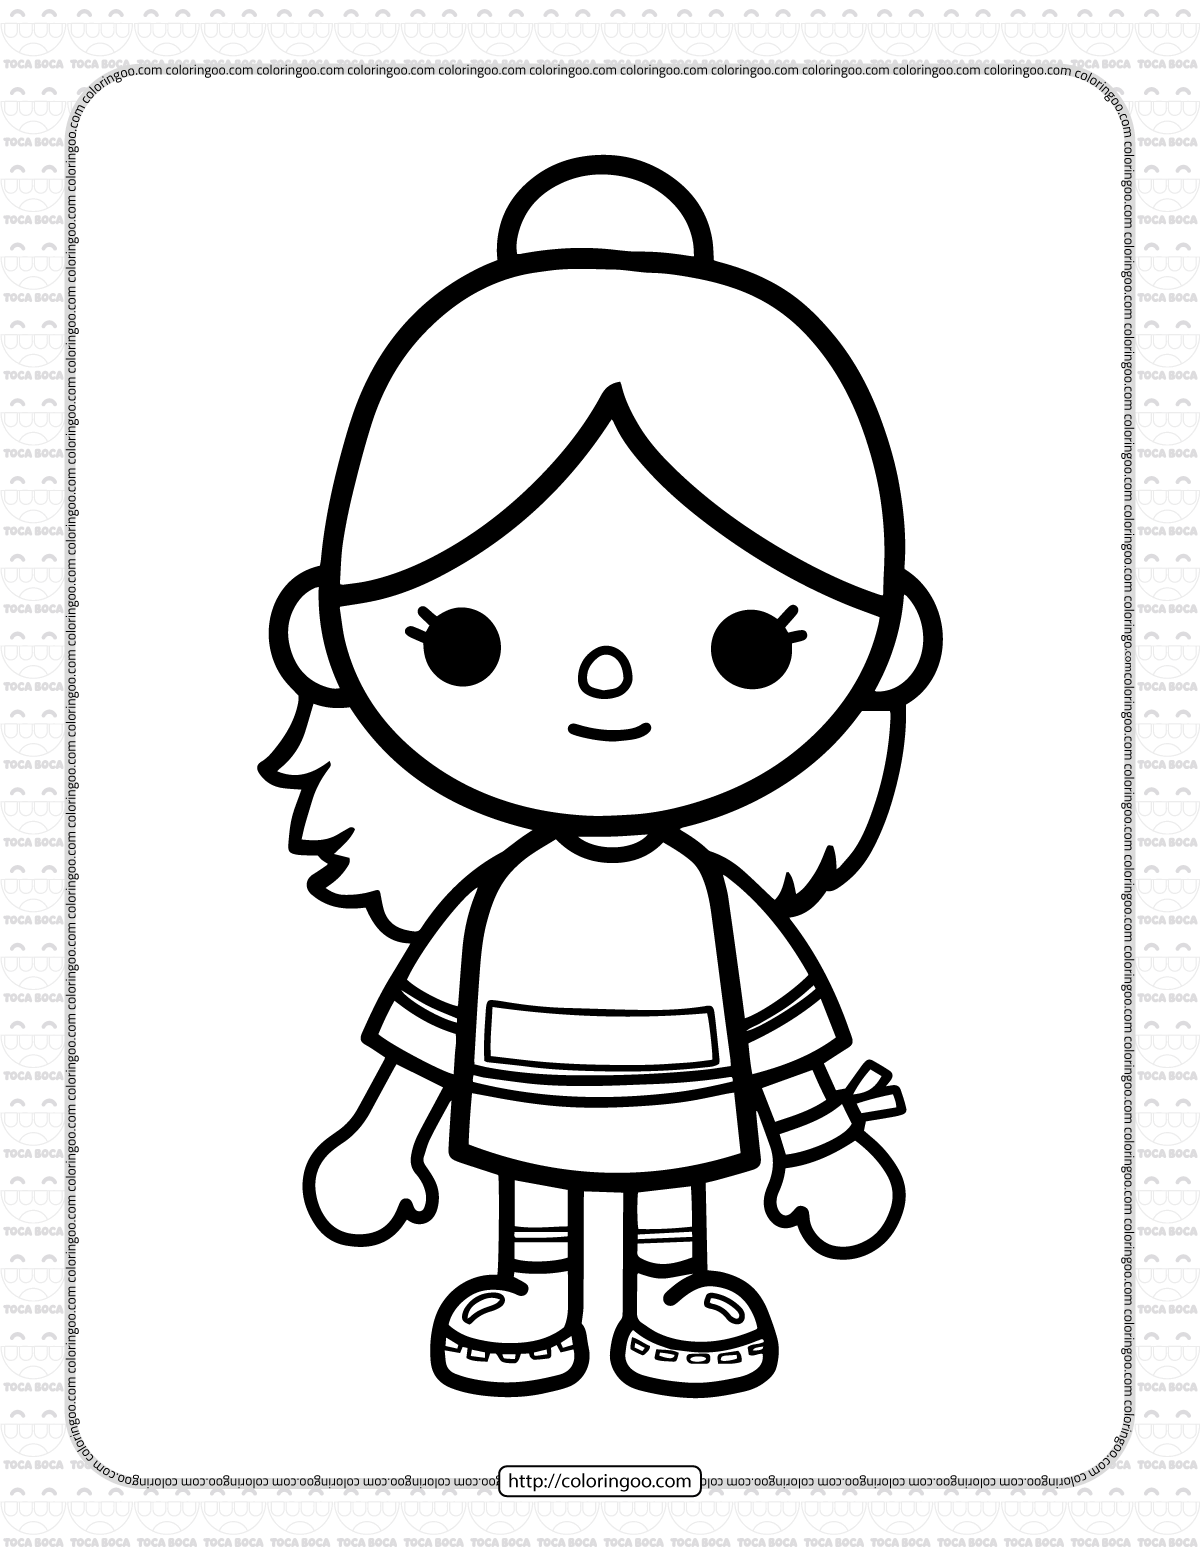 Toca Life Coloring Pages 2 | Coloring pages, Color of life, Paper dolls book